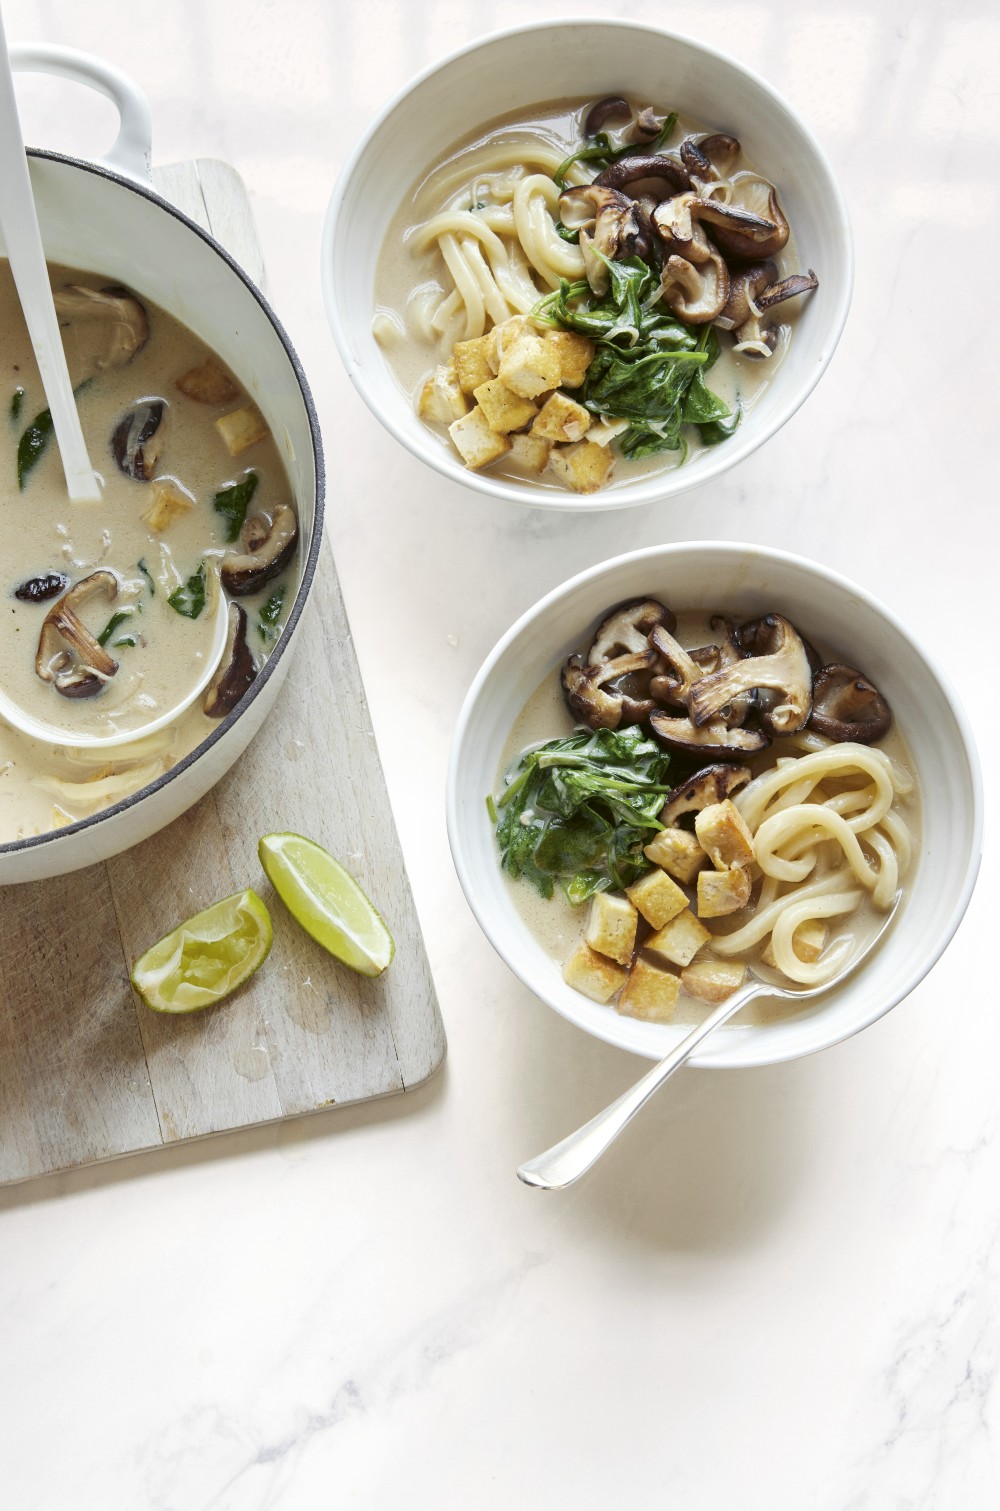 Comforting Udon Noodle Bowls with Mushroom and Coconut